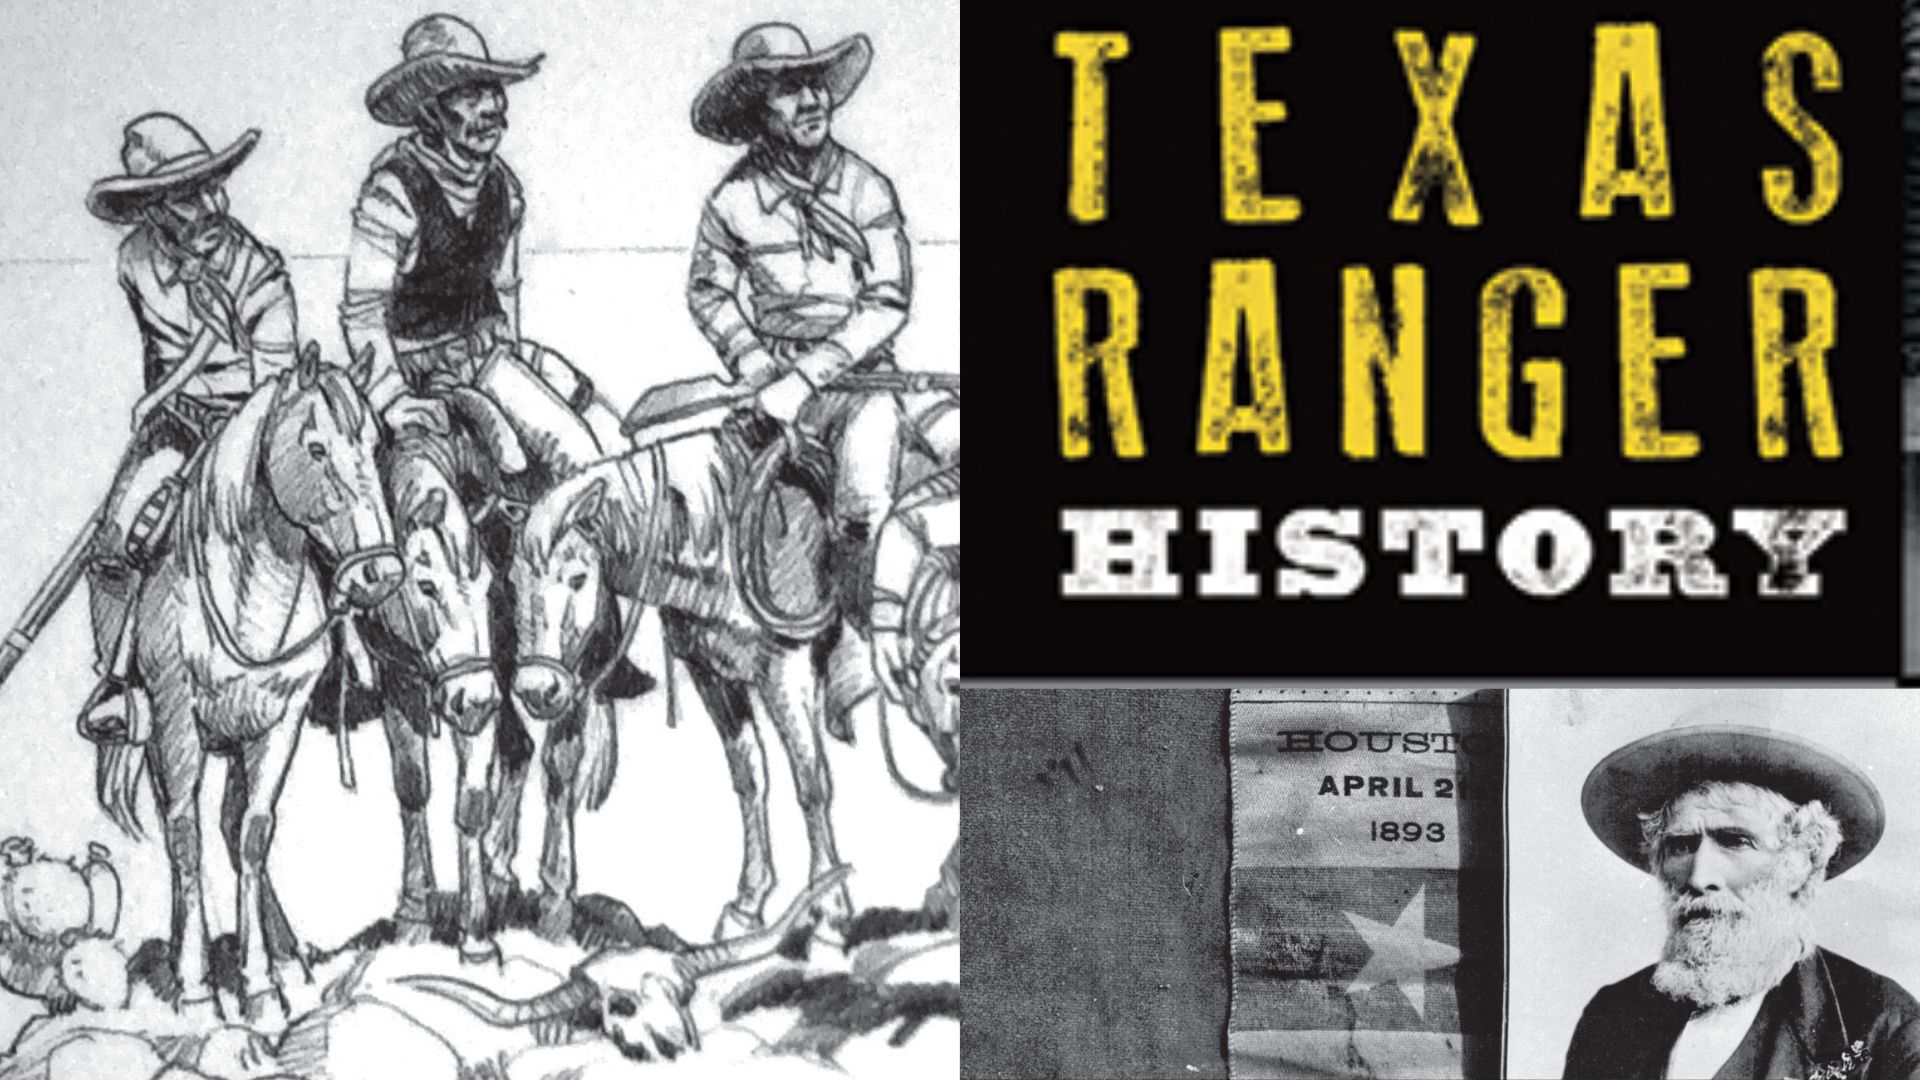 On the trail of Texas Ranger history - Yesterday's America